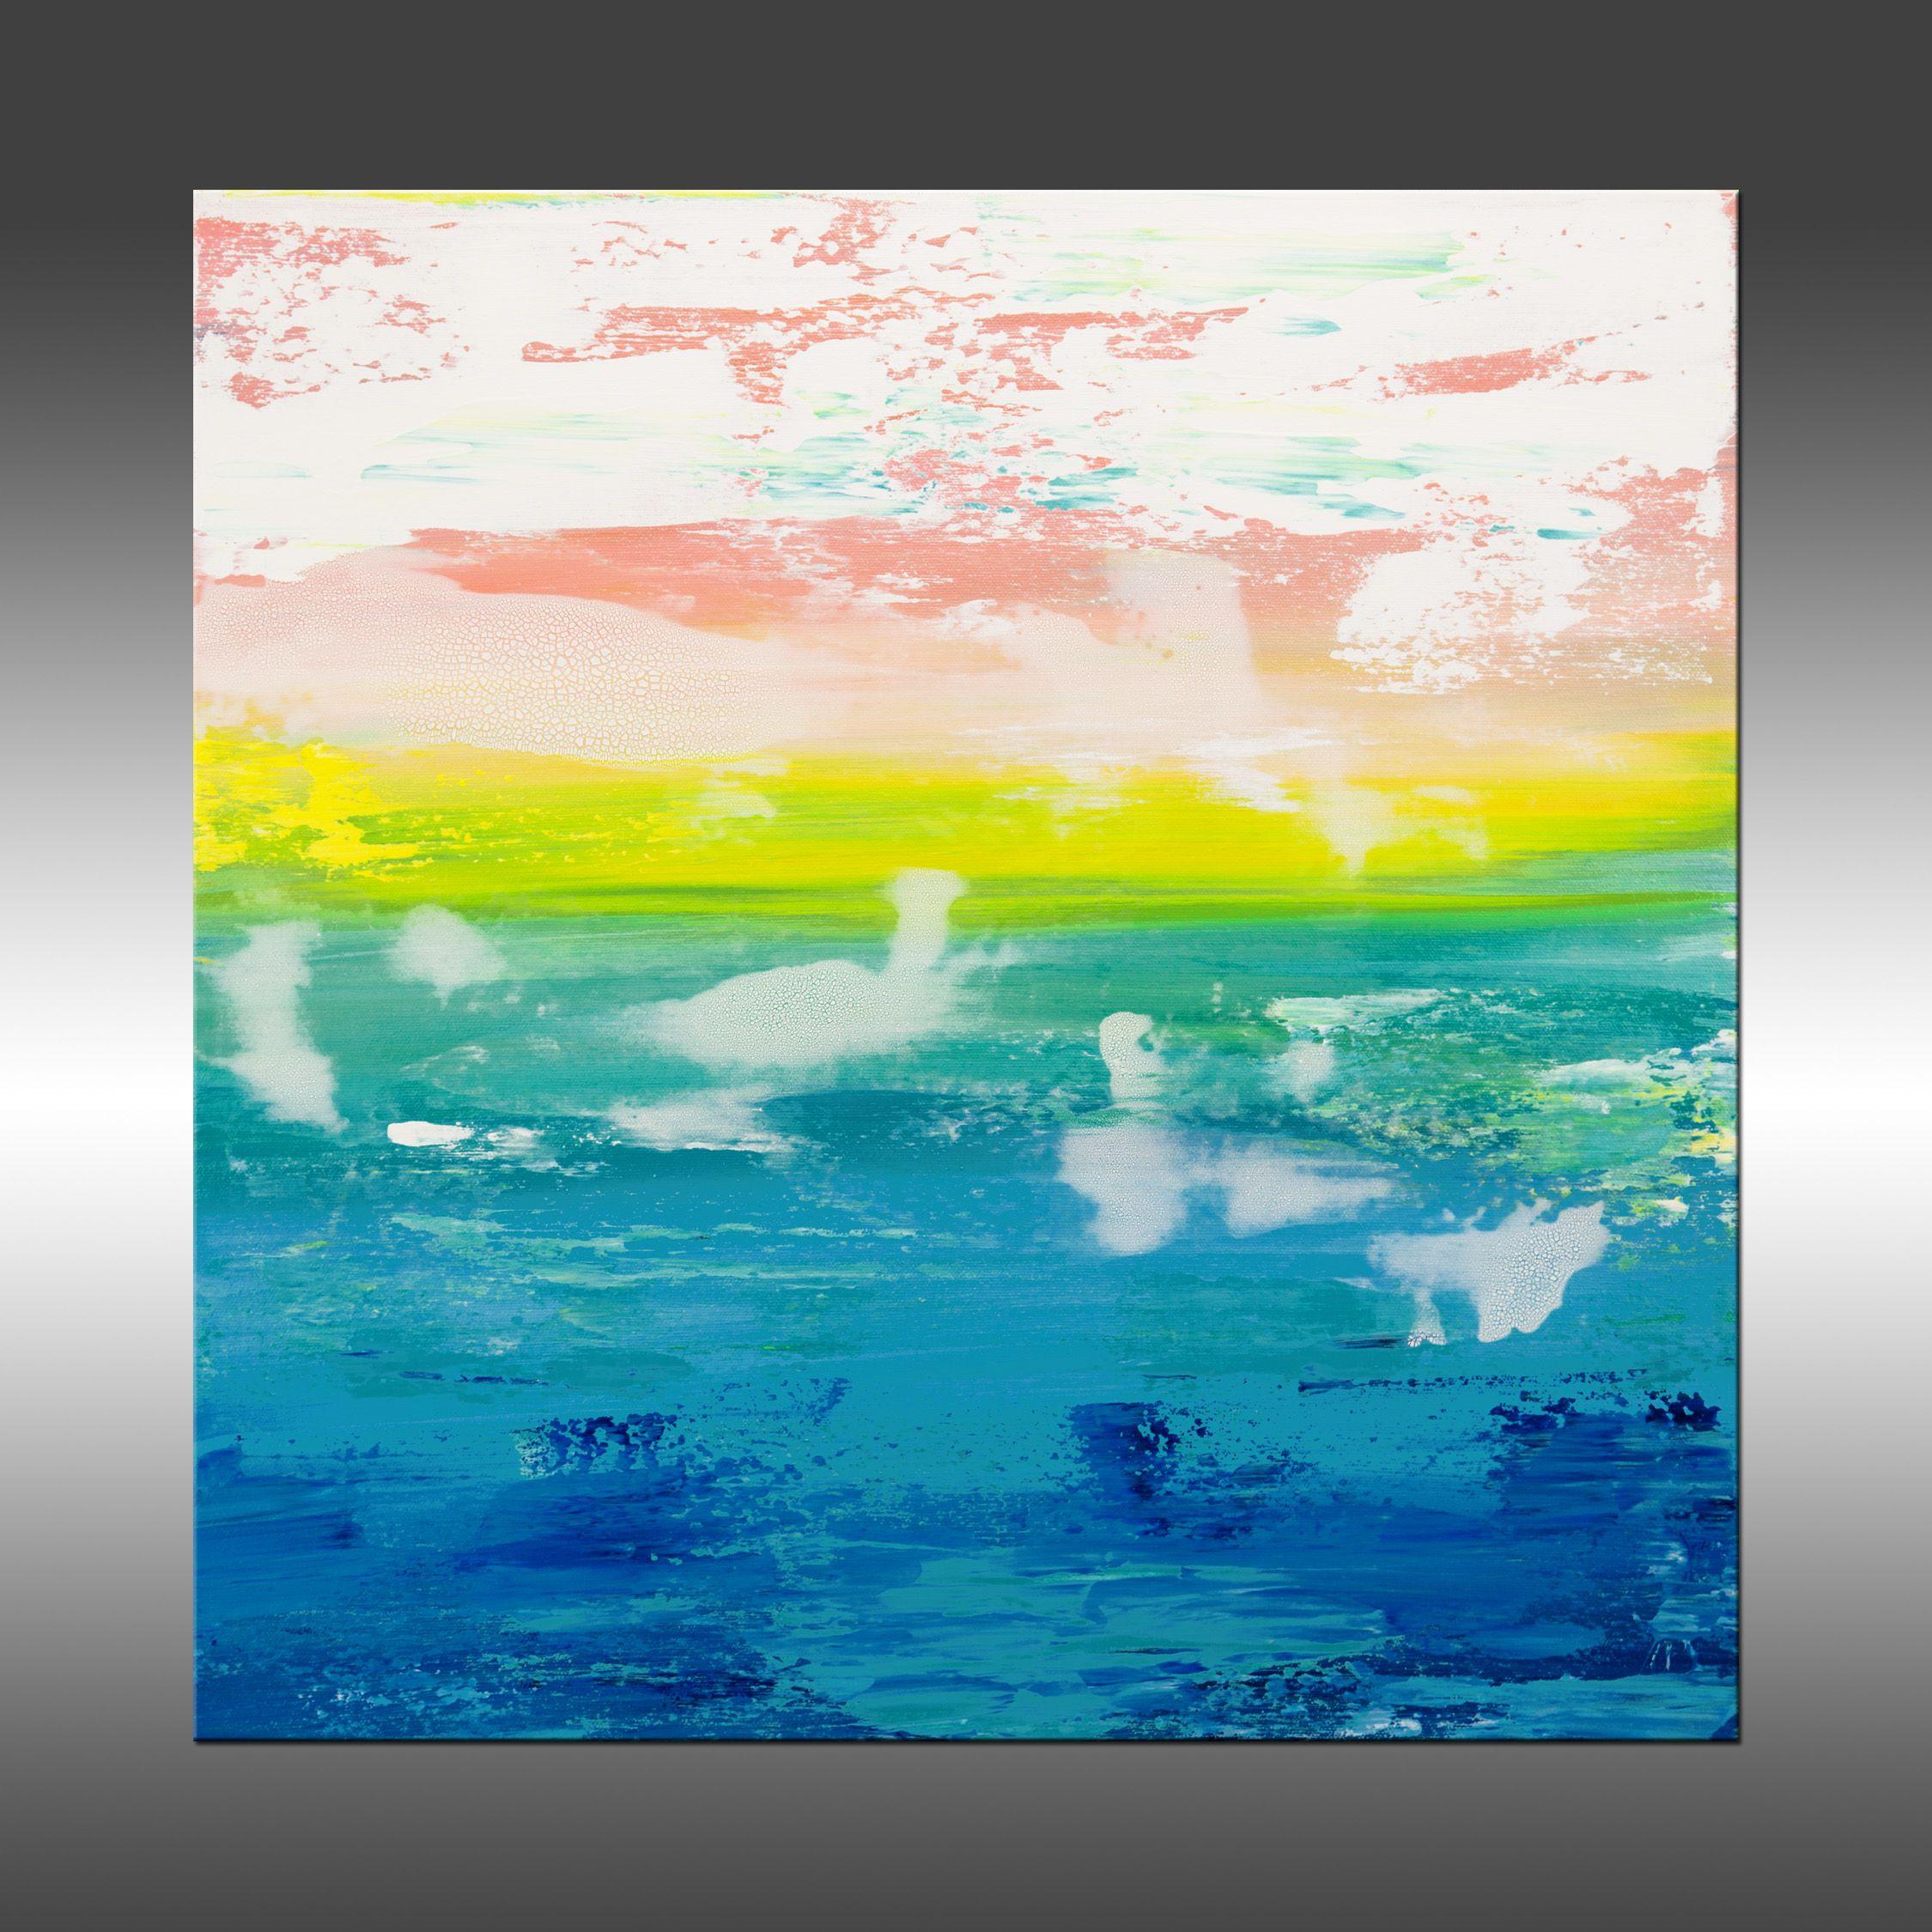 Island Time is an original painting, created with acrylic paint on gallery-wrapped canvas. It has a width of 20 inches and a height of 20 inches with a depth of 1.5 inches (20x20x1.5).    The colors used in the painting are pink/salmon, yellow,